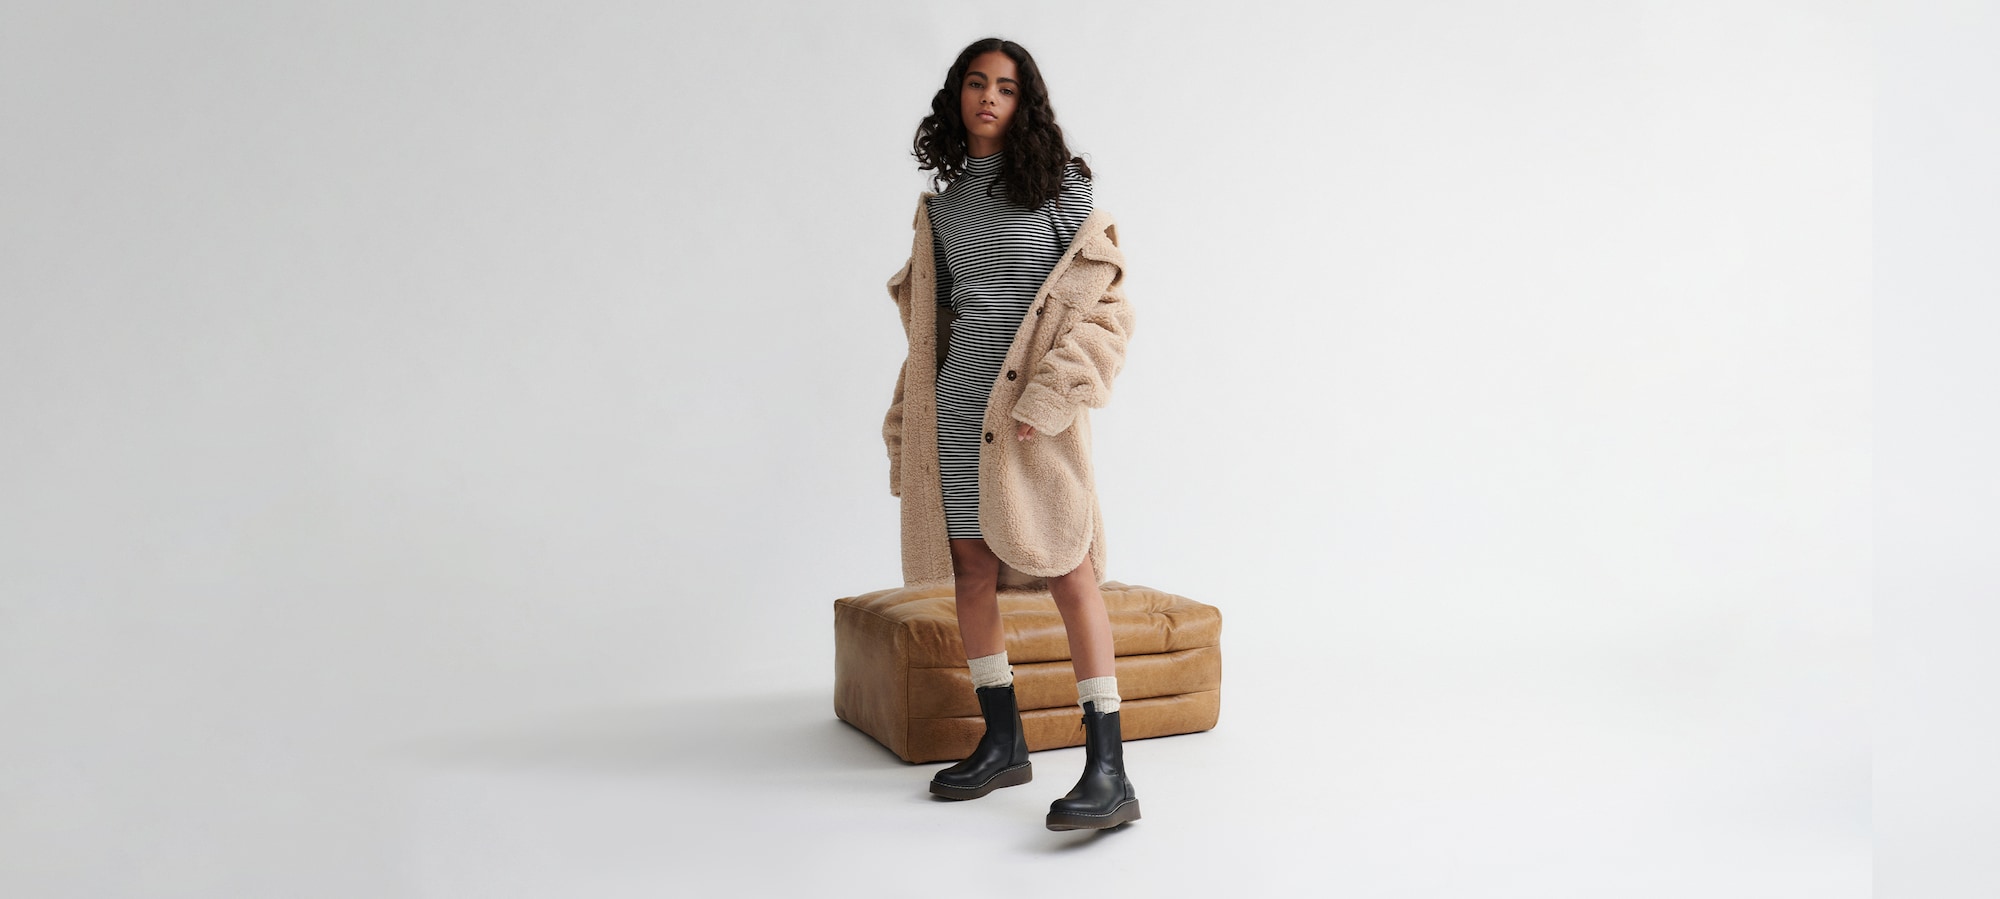 Cozy up Looks for colder weather